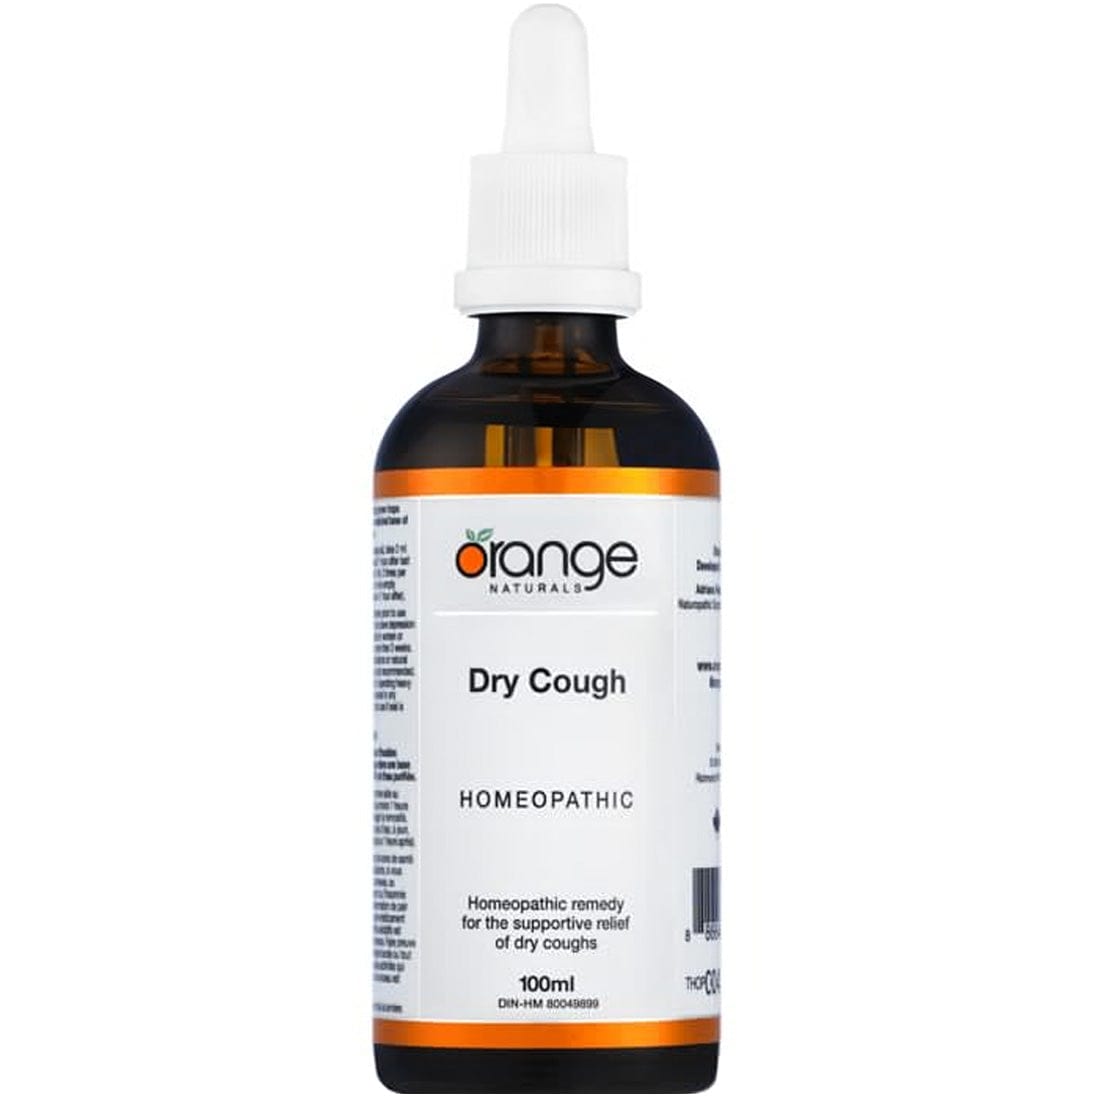 Orange Naturals Dry Cough Homeopathic Remedy, 100ml